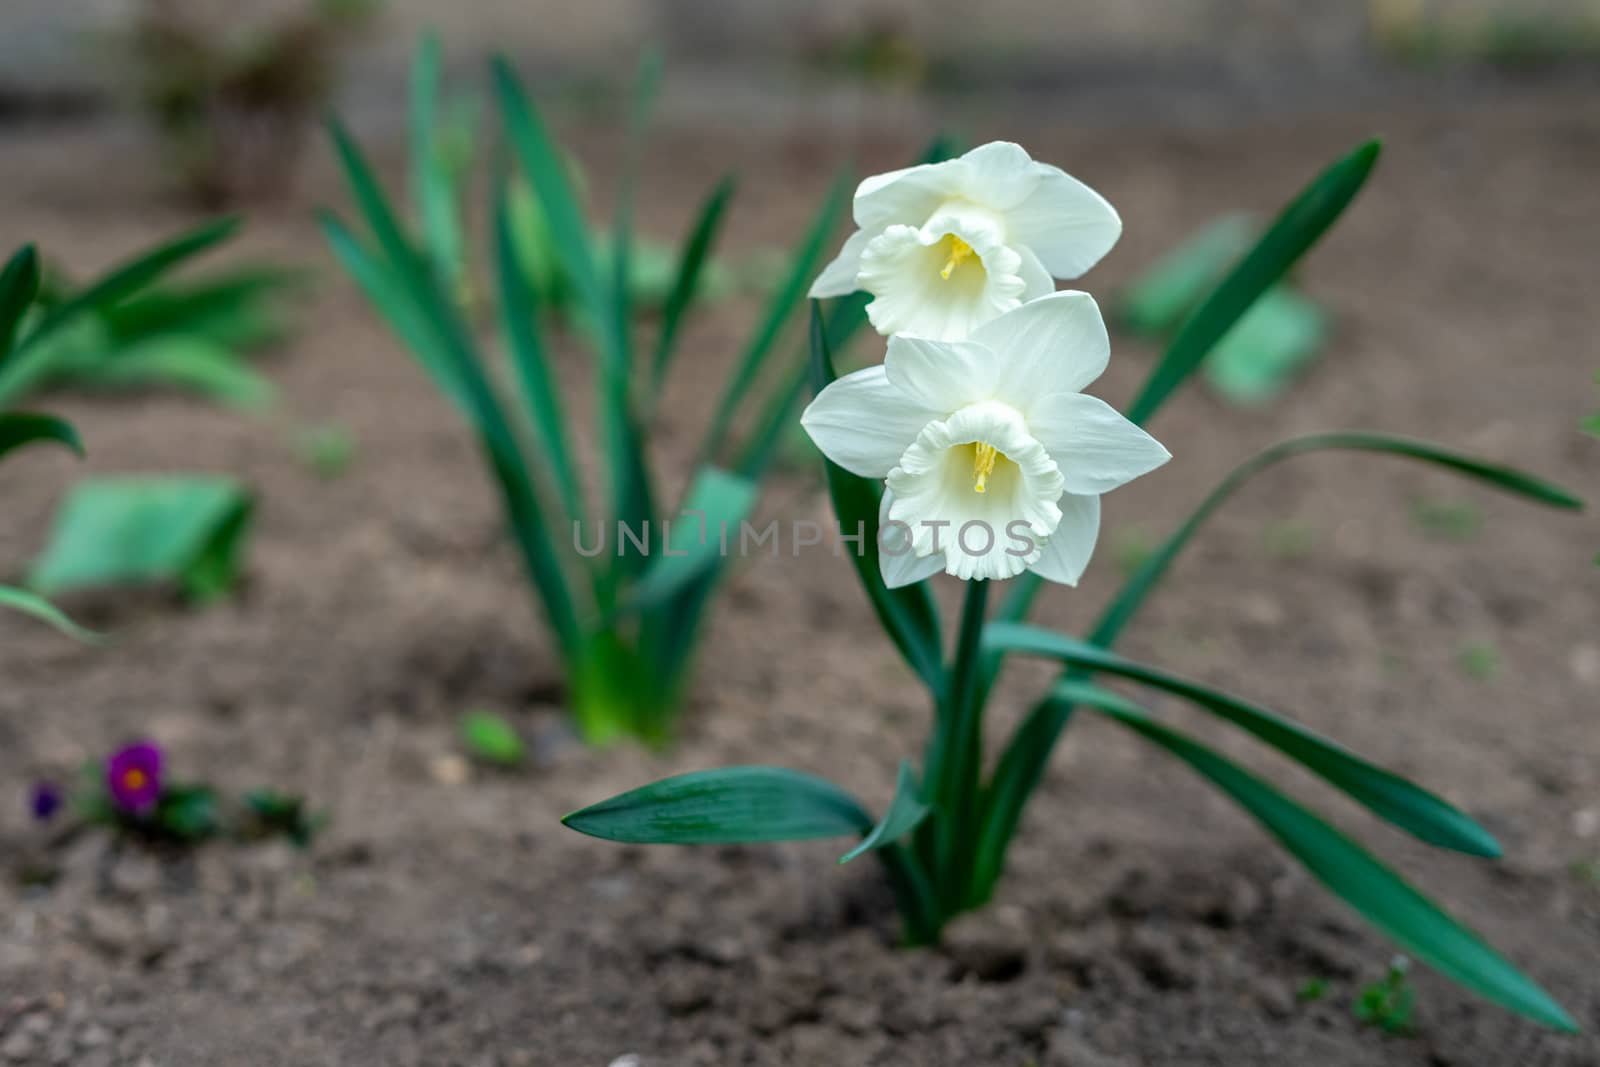 Narcissus tubular white delicate flower with a thin stem and exquisite aroma by Serhii_Voroshchuk